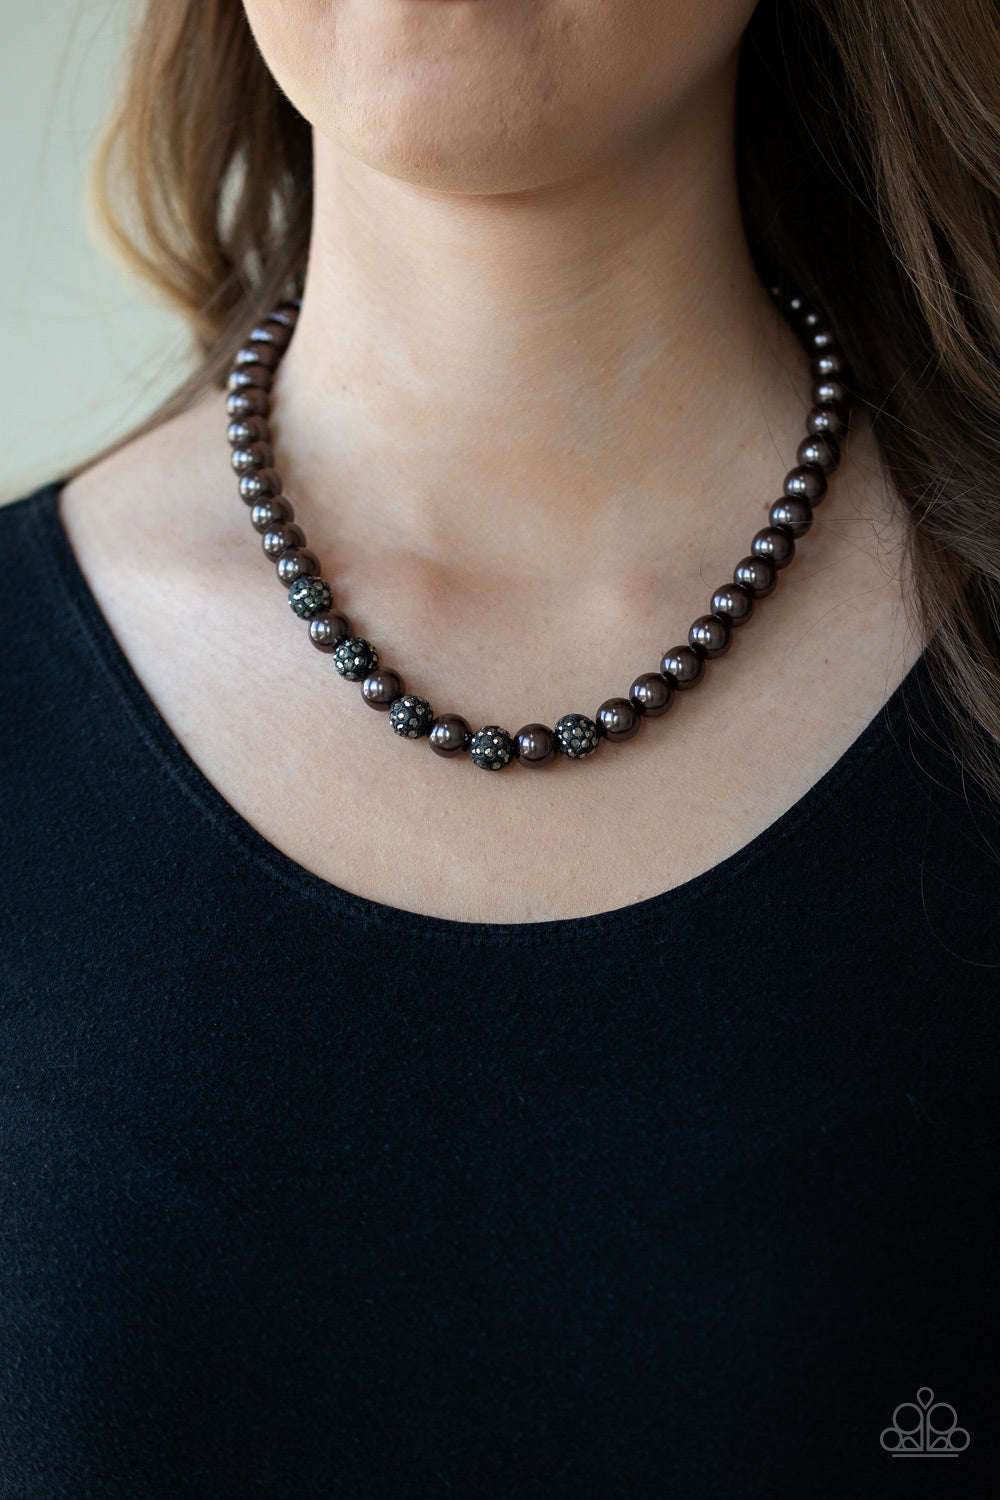 Paparazzi Accessories- Infused with glittery hematite rhinestone encrusted beads, a strand of pearly gunmetal beads drapes below the collar in a timeless fashion. Features an adjustable clasp closure.